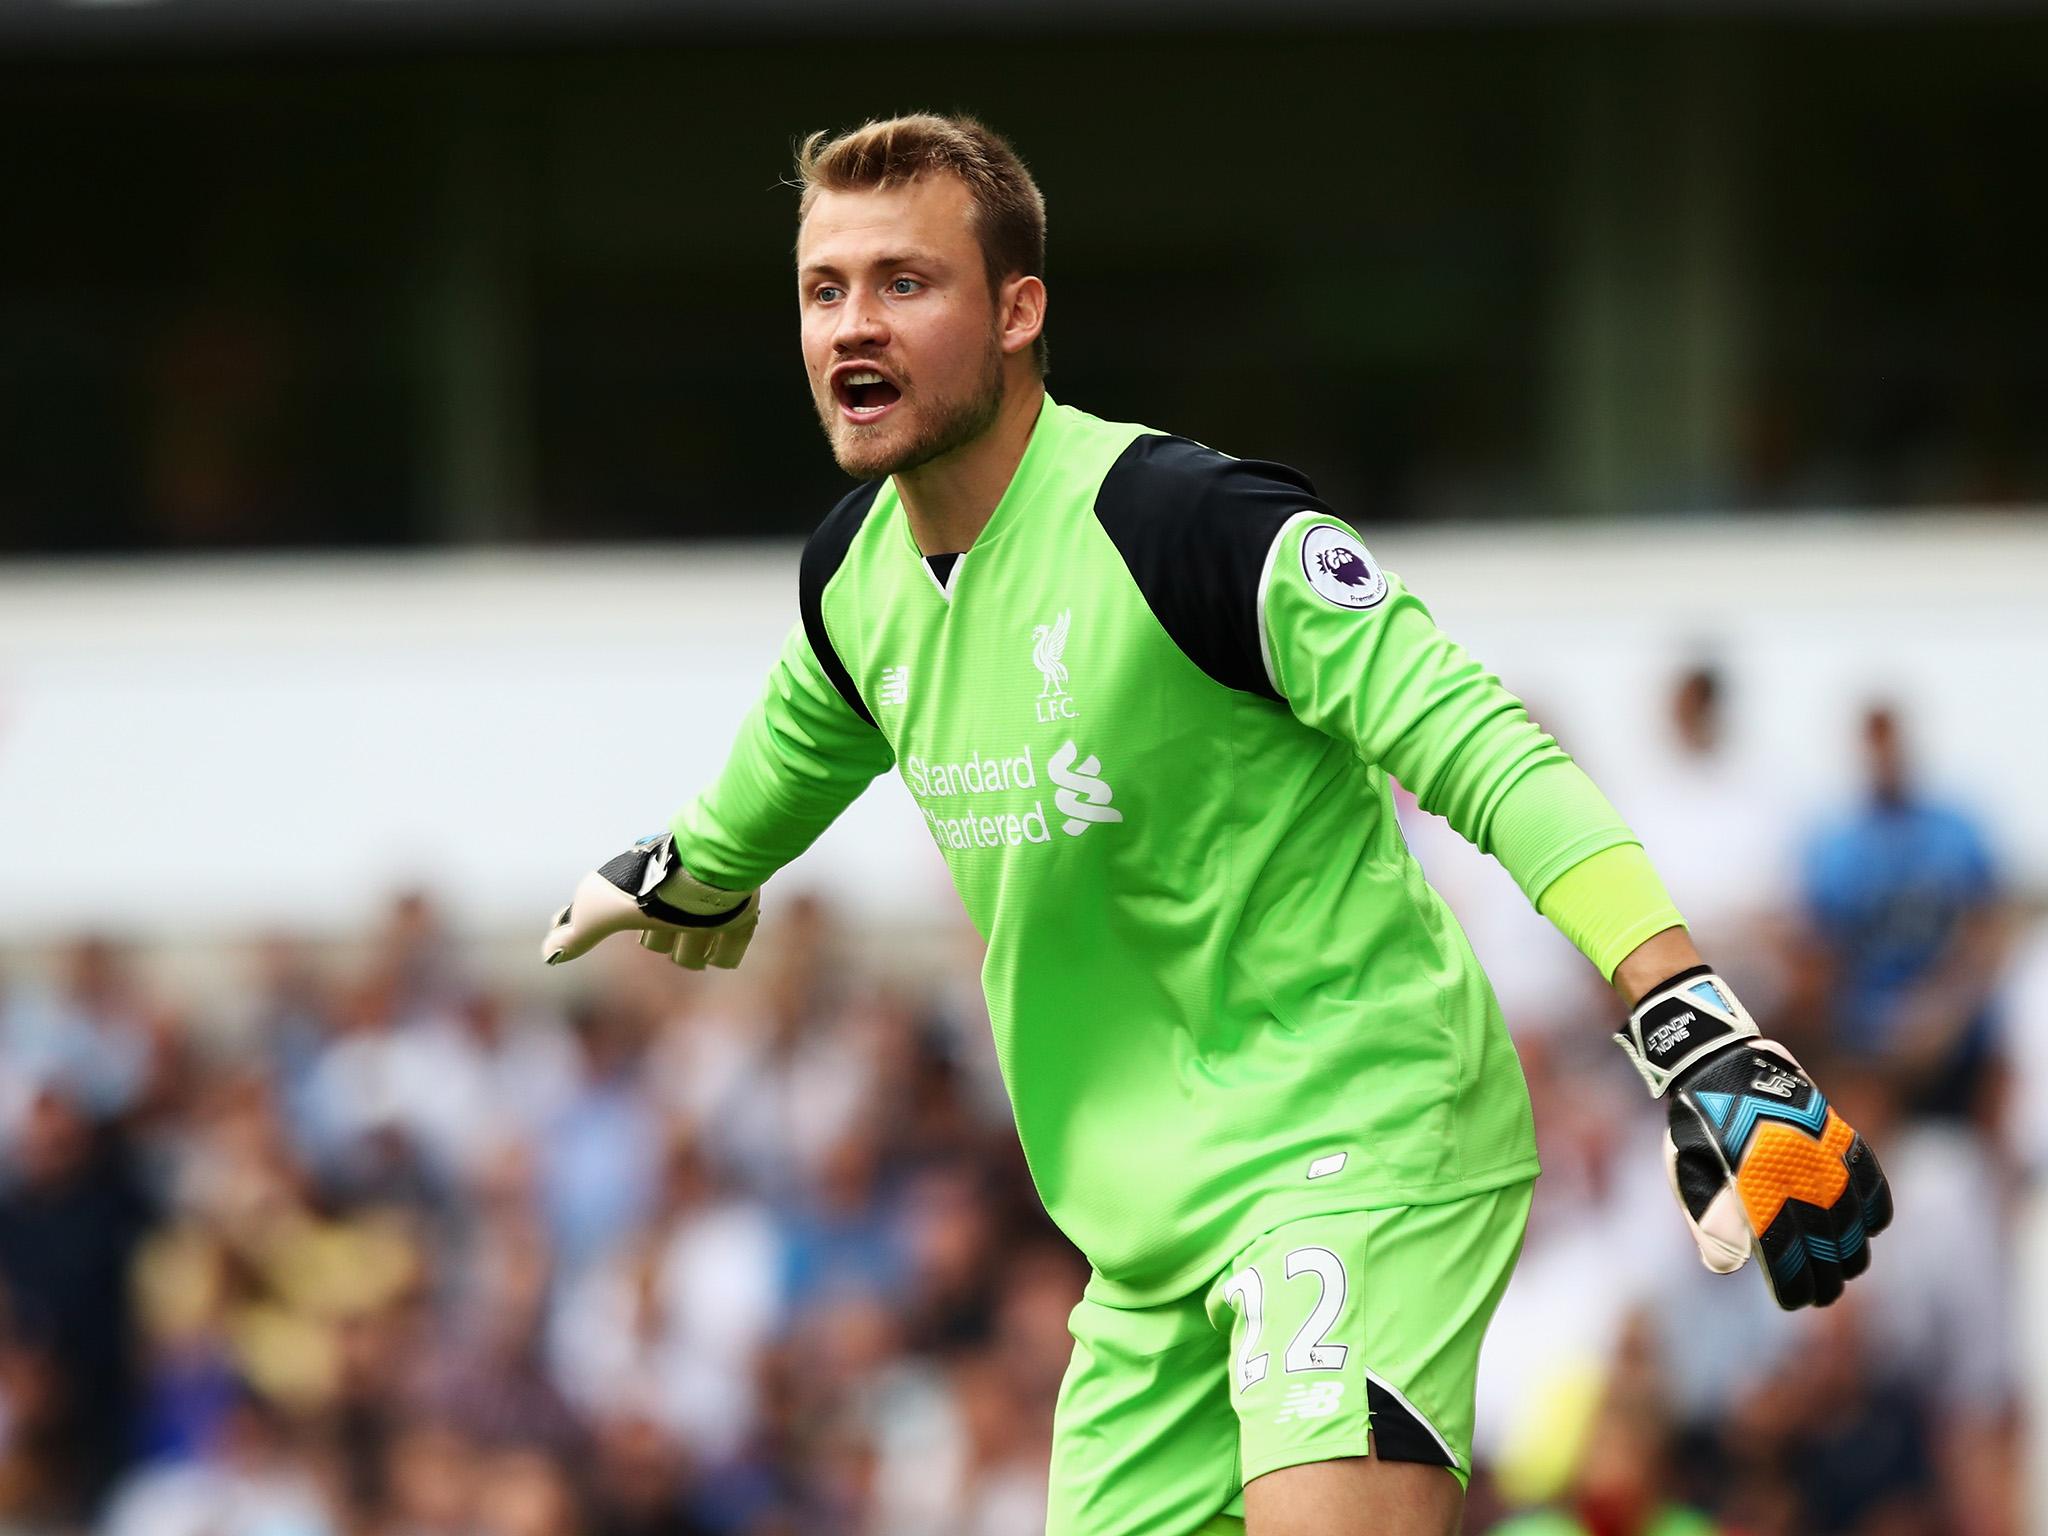 Mignolet is back in Liverpool's starting XI (Getty)